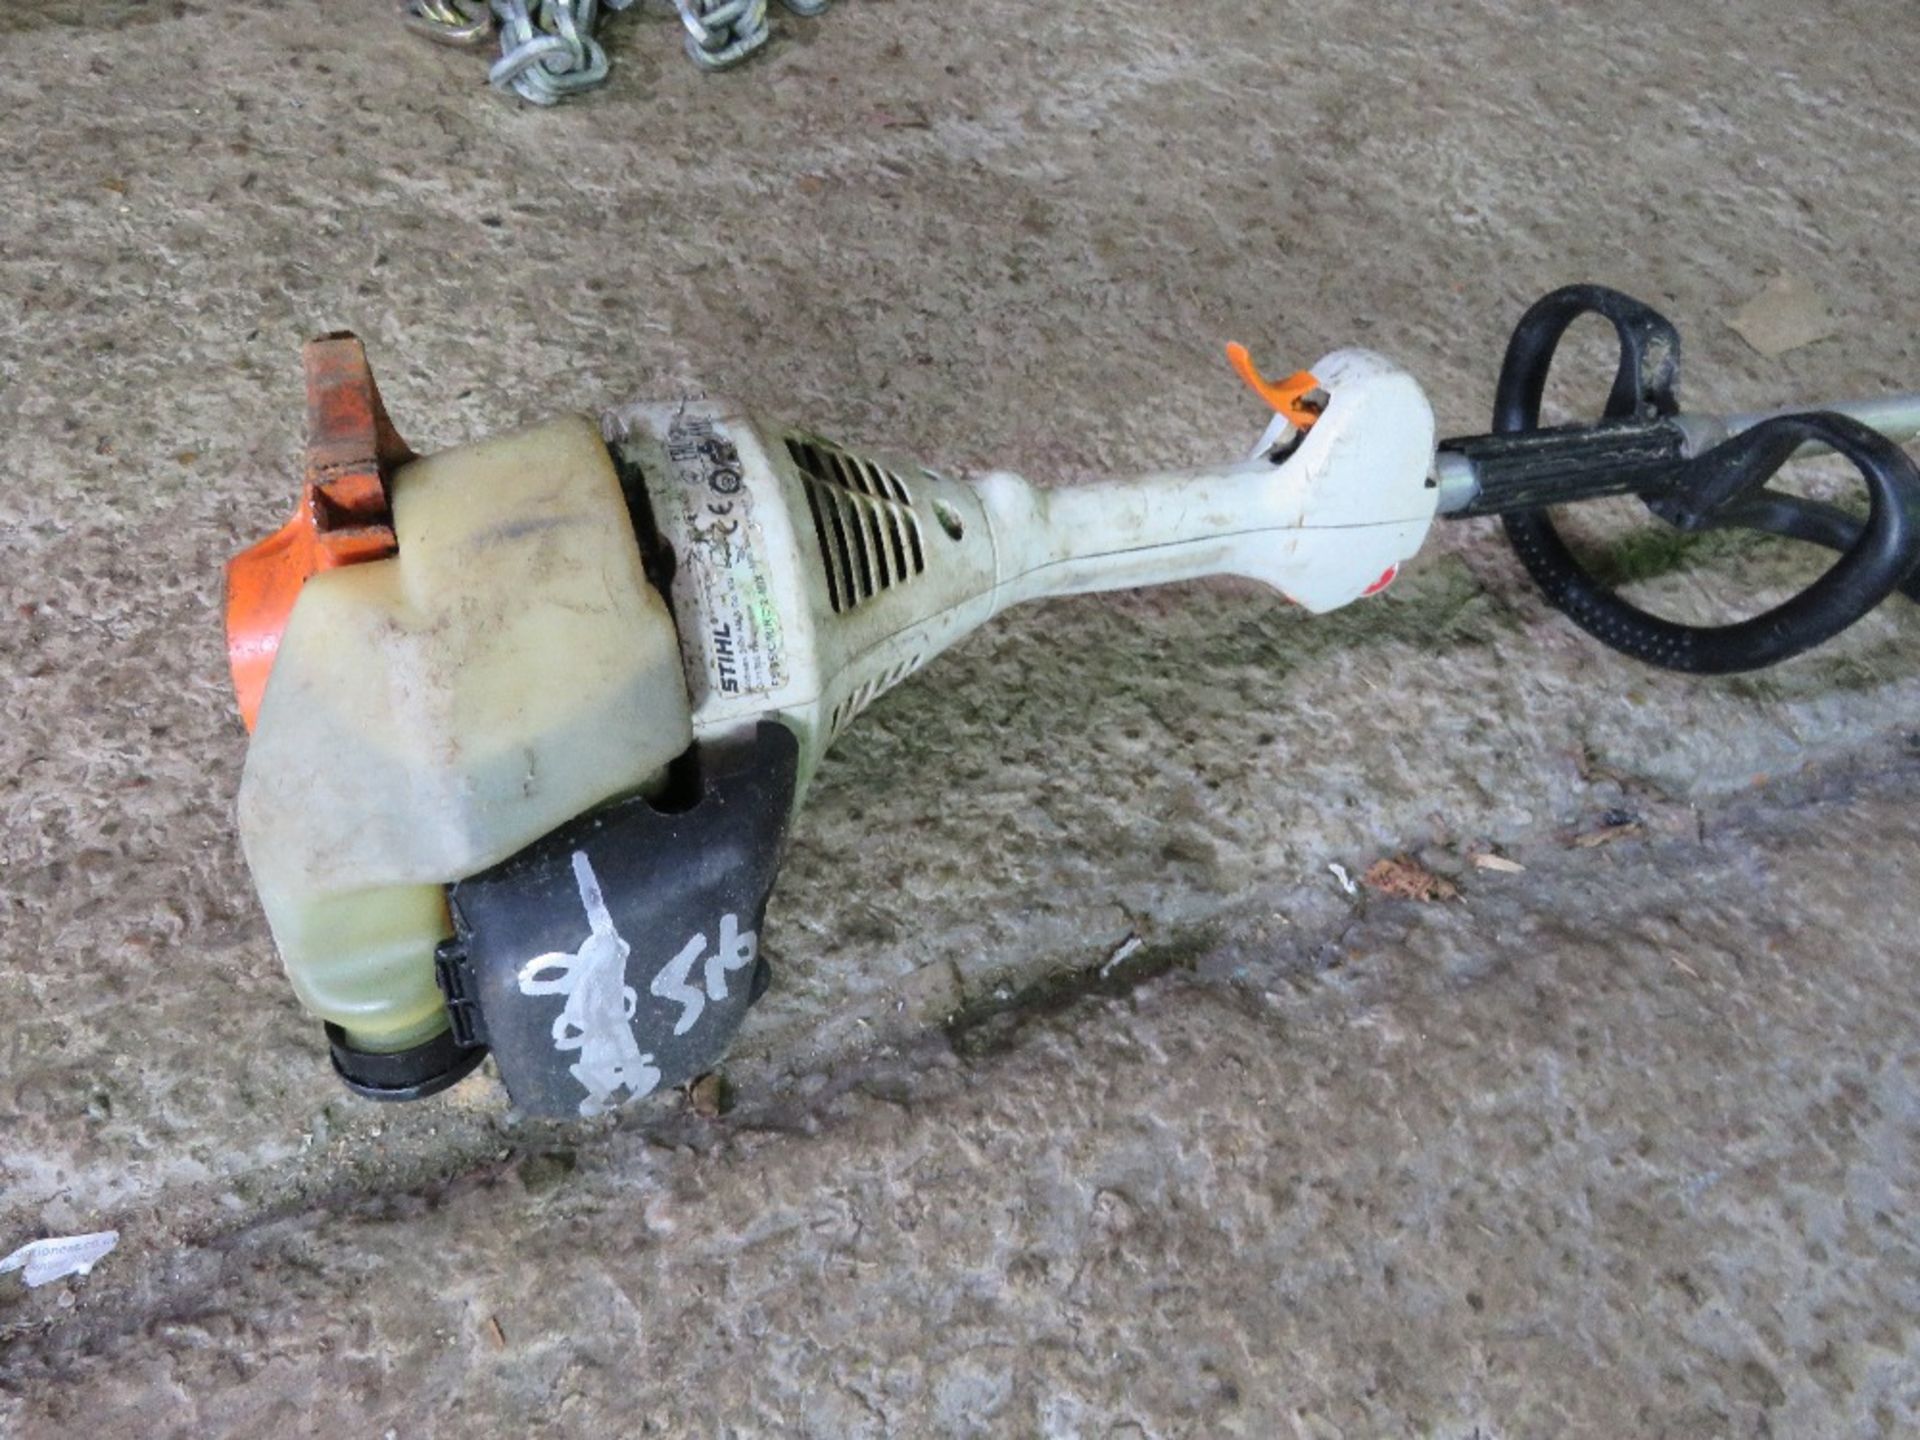 STIHL STRIMMER, REQUIRES RECOIL ROPE. DIRECT FROM LANDSCAPE MAINTENANCE COMPANY DUE TO DEPOT CLO - Image 3 of 6